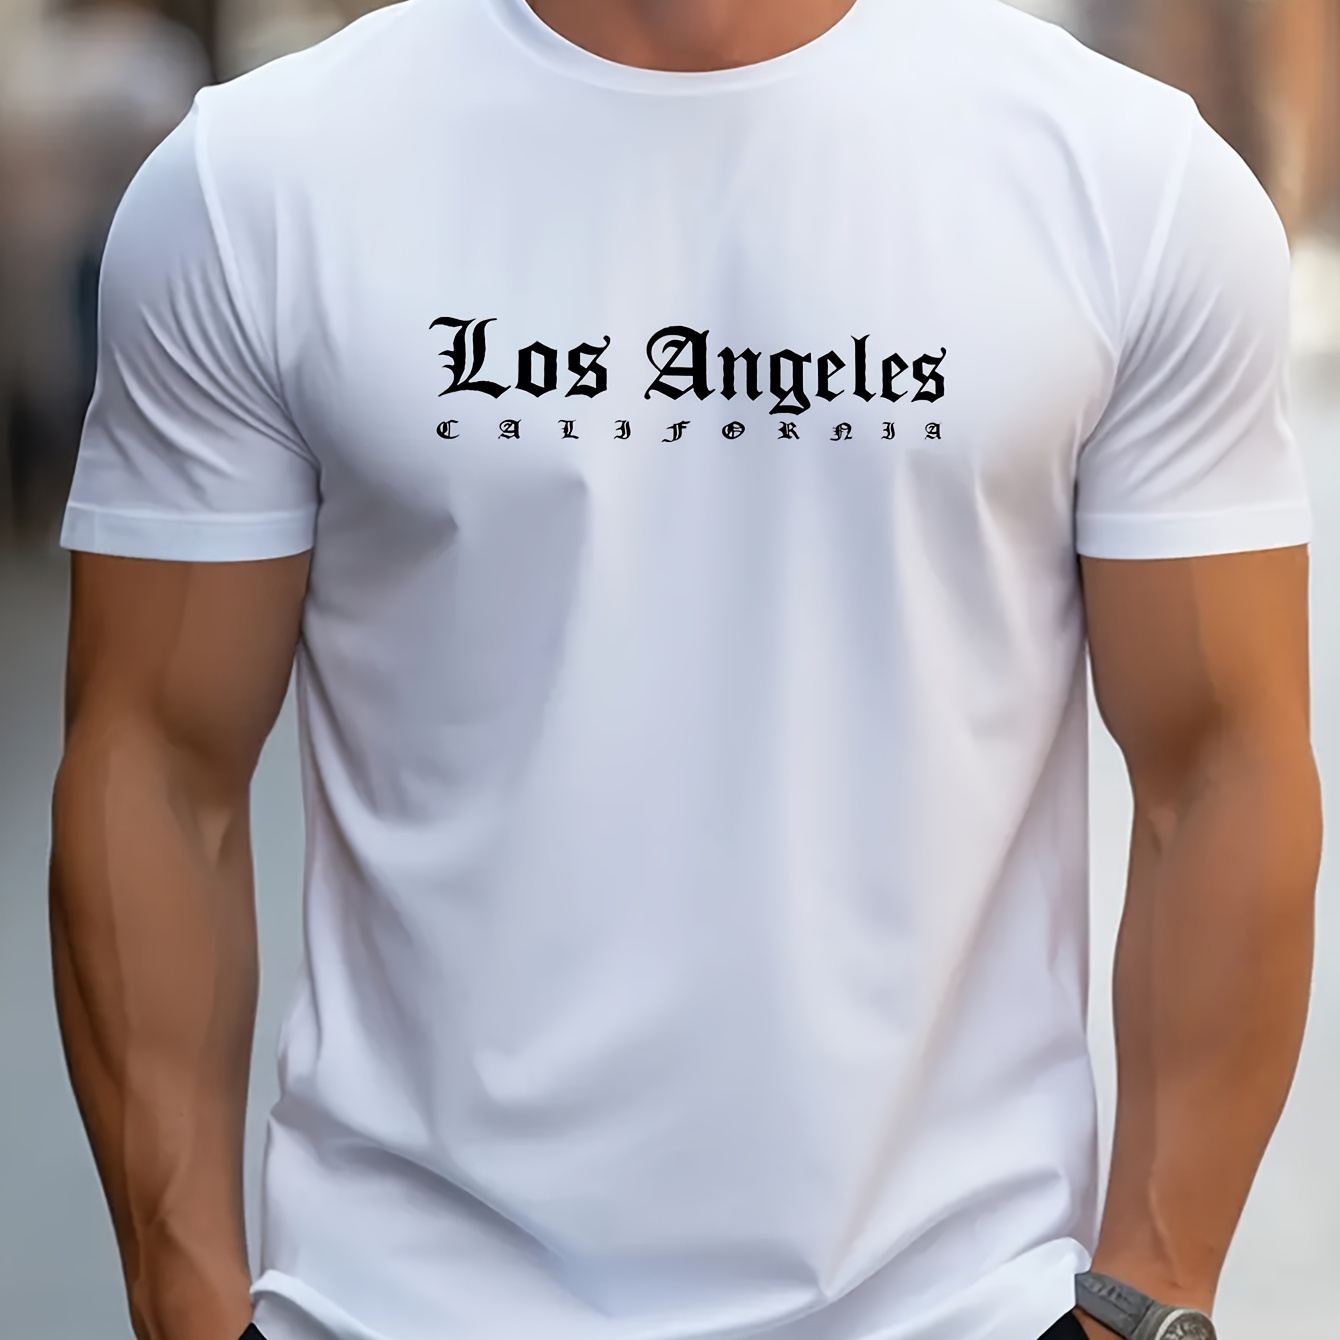 

Los Angeles Alphabet Print Crew Neck Short Sleeve T-shirt For Men, Casual Summer T-shirt For Daily Wear And Vacation Resorts